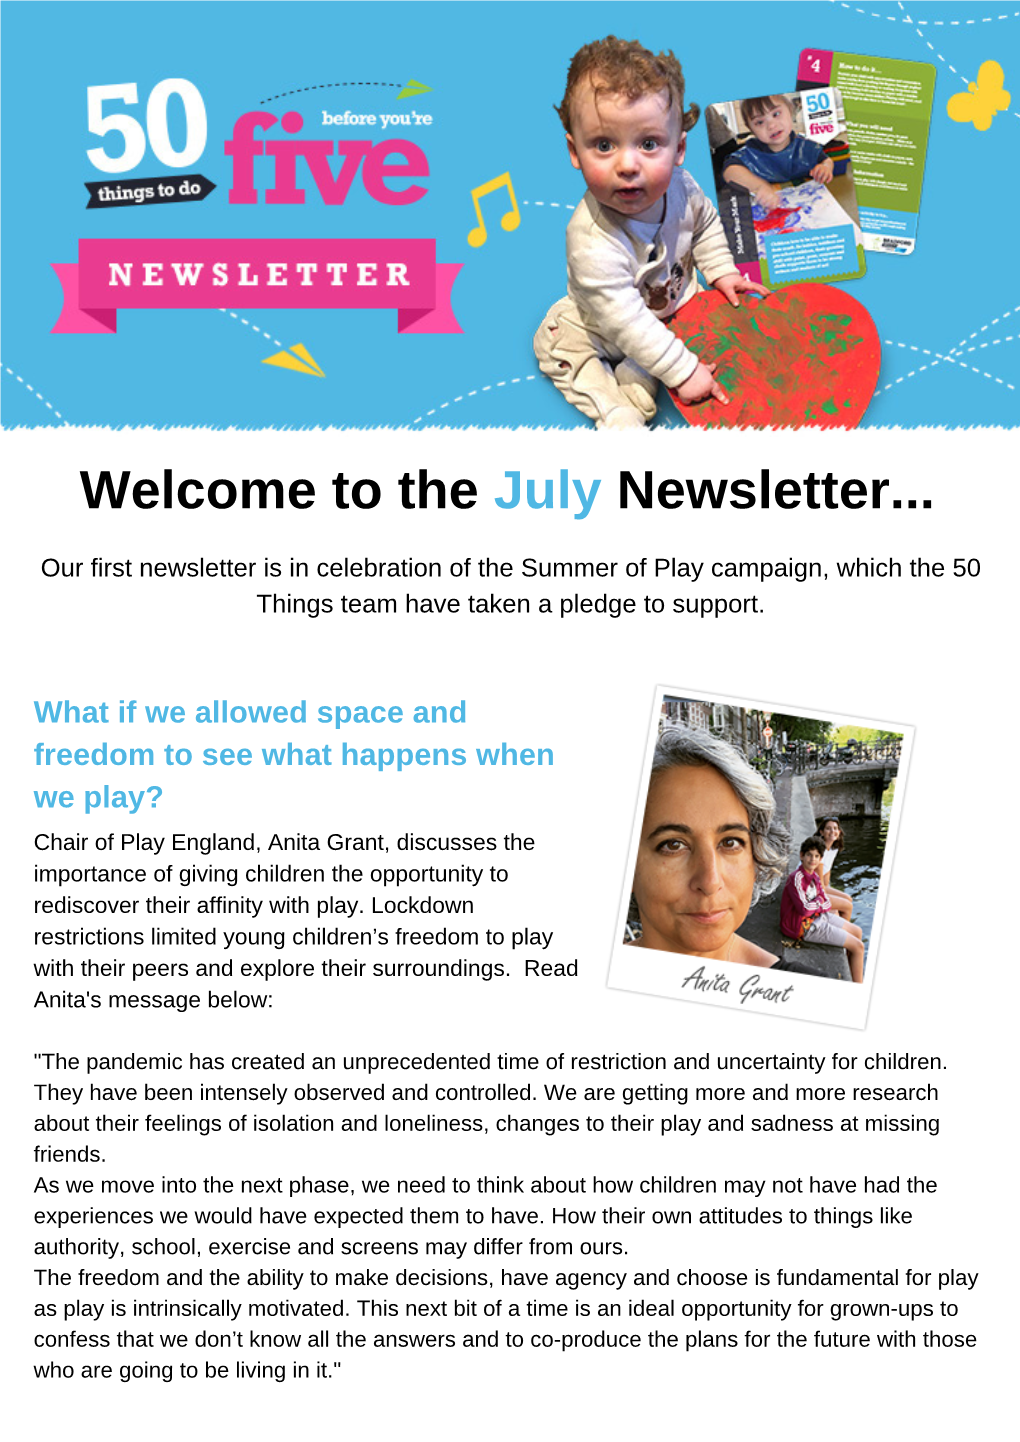 Welcome to the July Newsletter... Our First Newsletter Is in Celebration of the Summer of Play Campaign, Which the 50 Things Team Have Taken a Pledge to Support